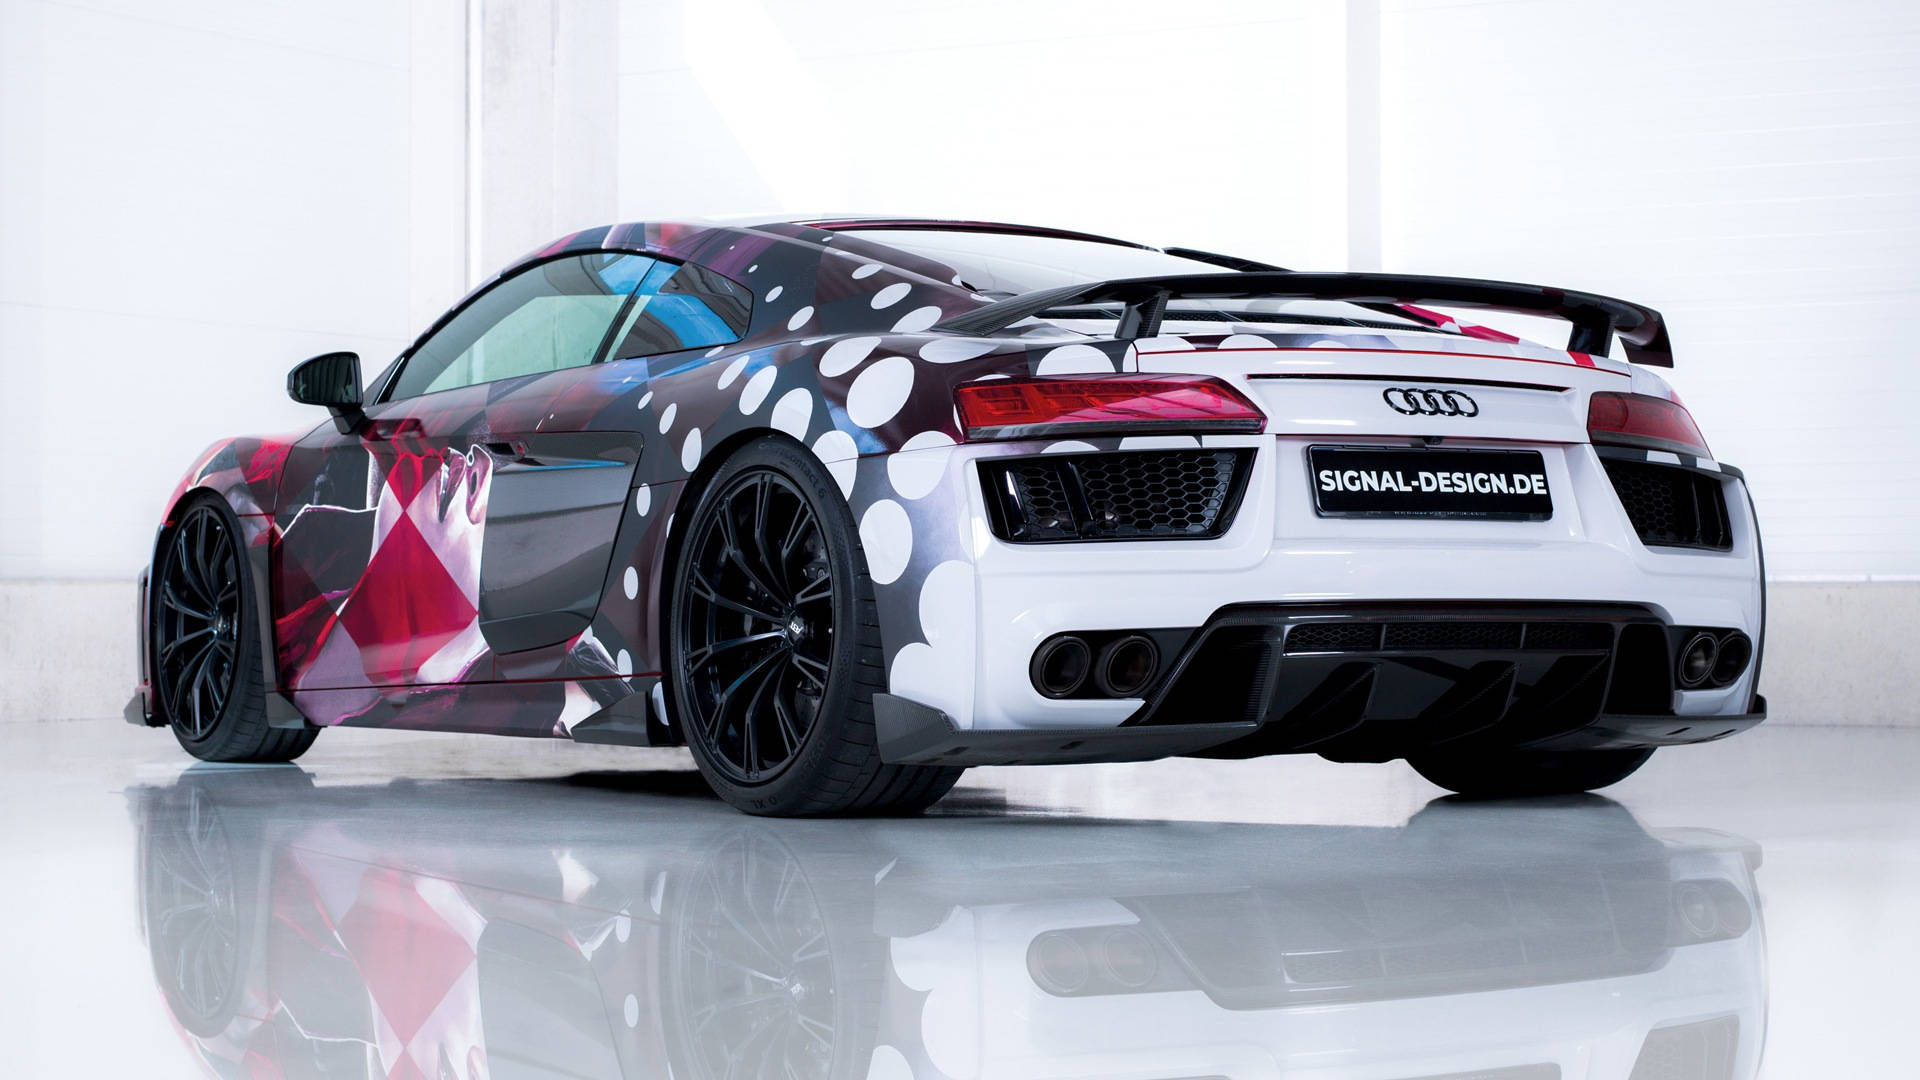 Remarkable View Of Custom-painted Audi R8